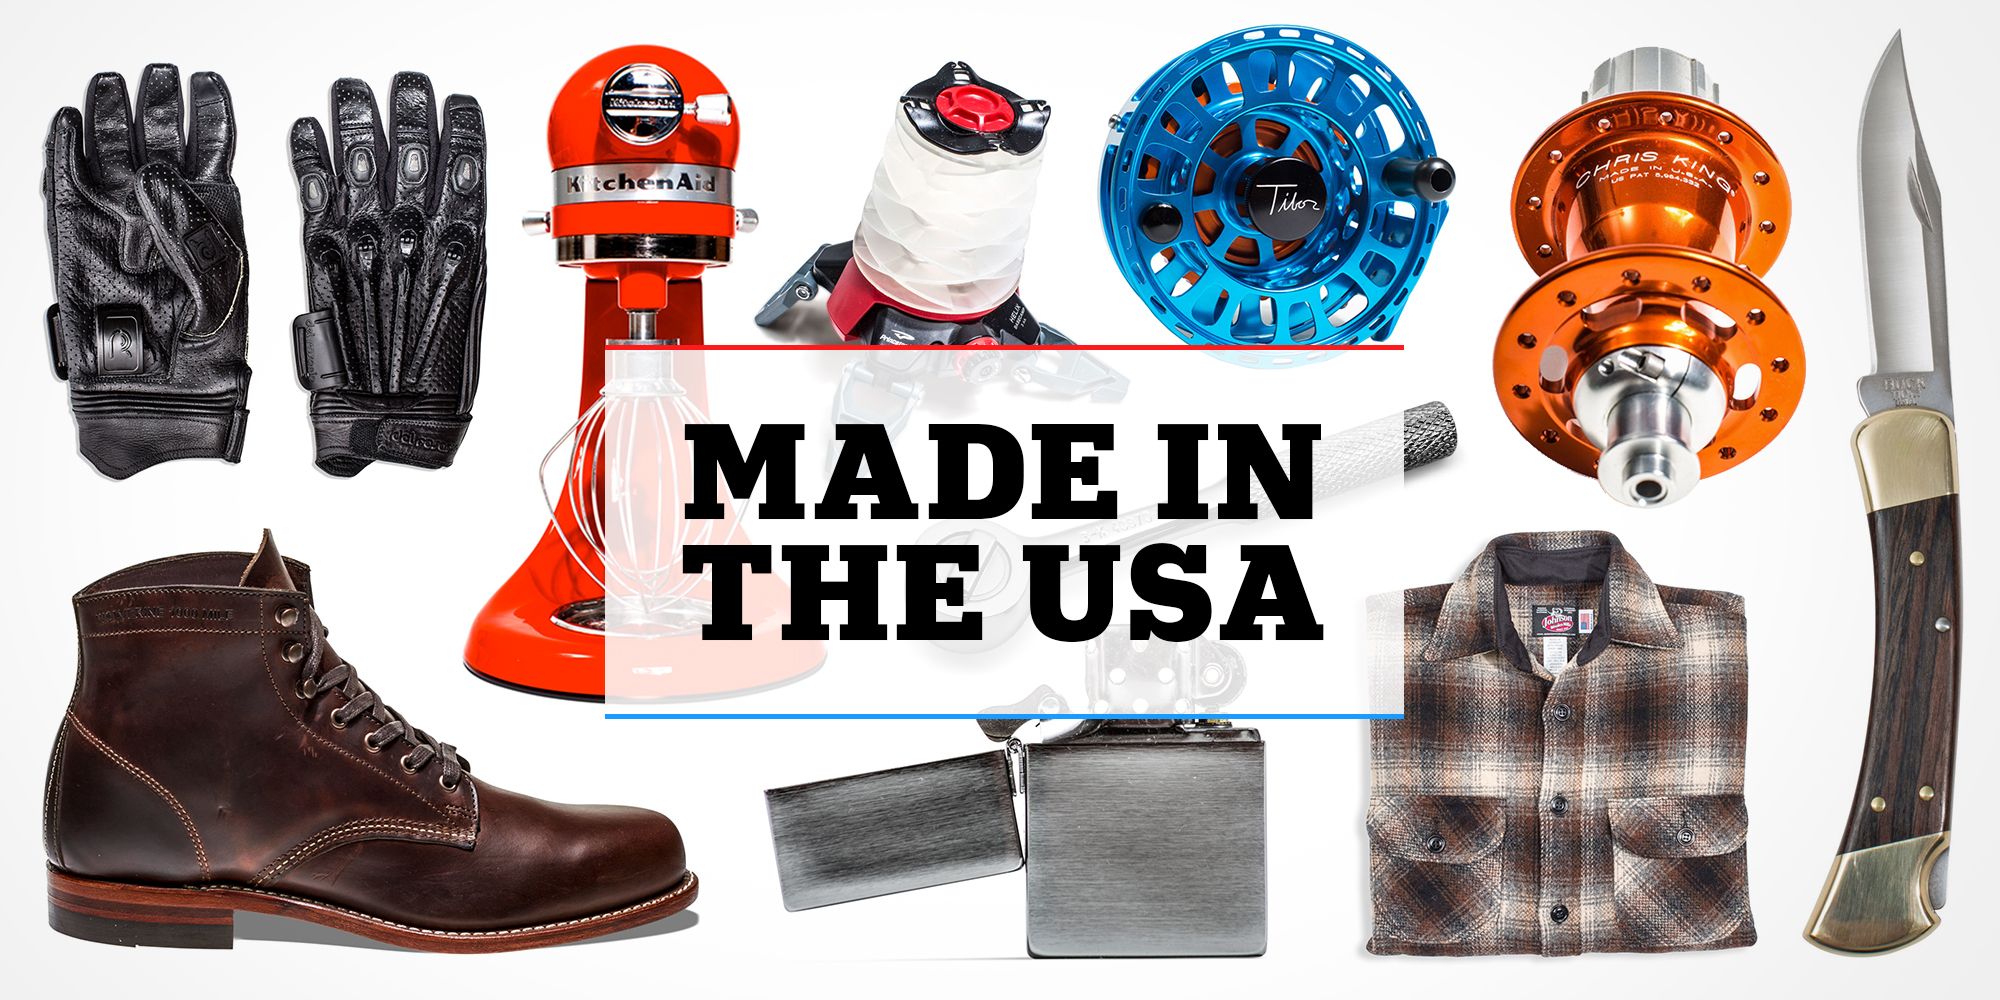 75 Products Made in the USA - Best American Made Products to Buy in 2020